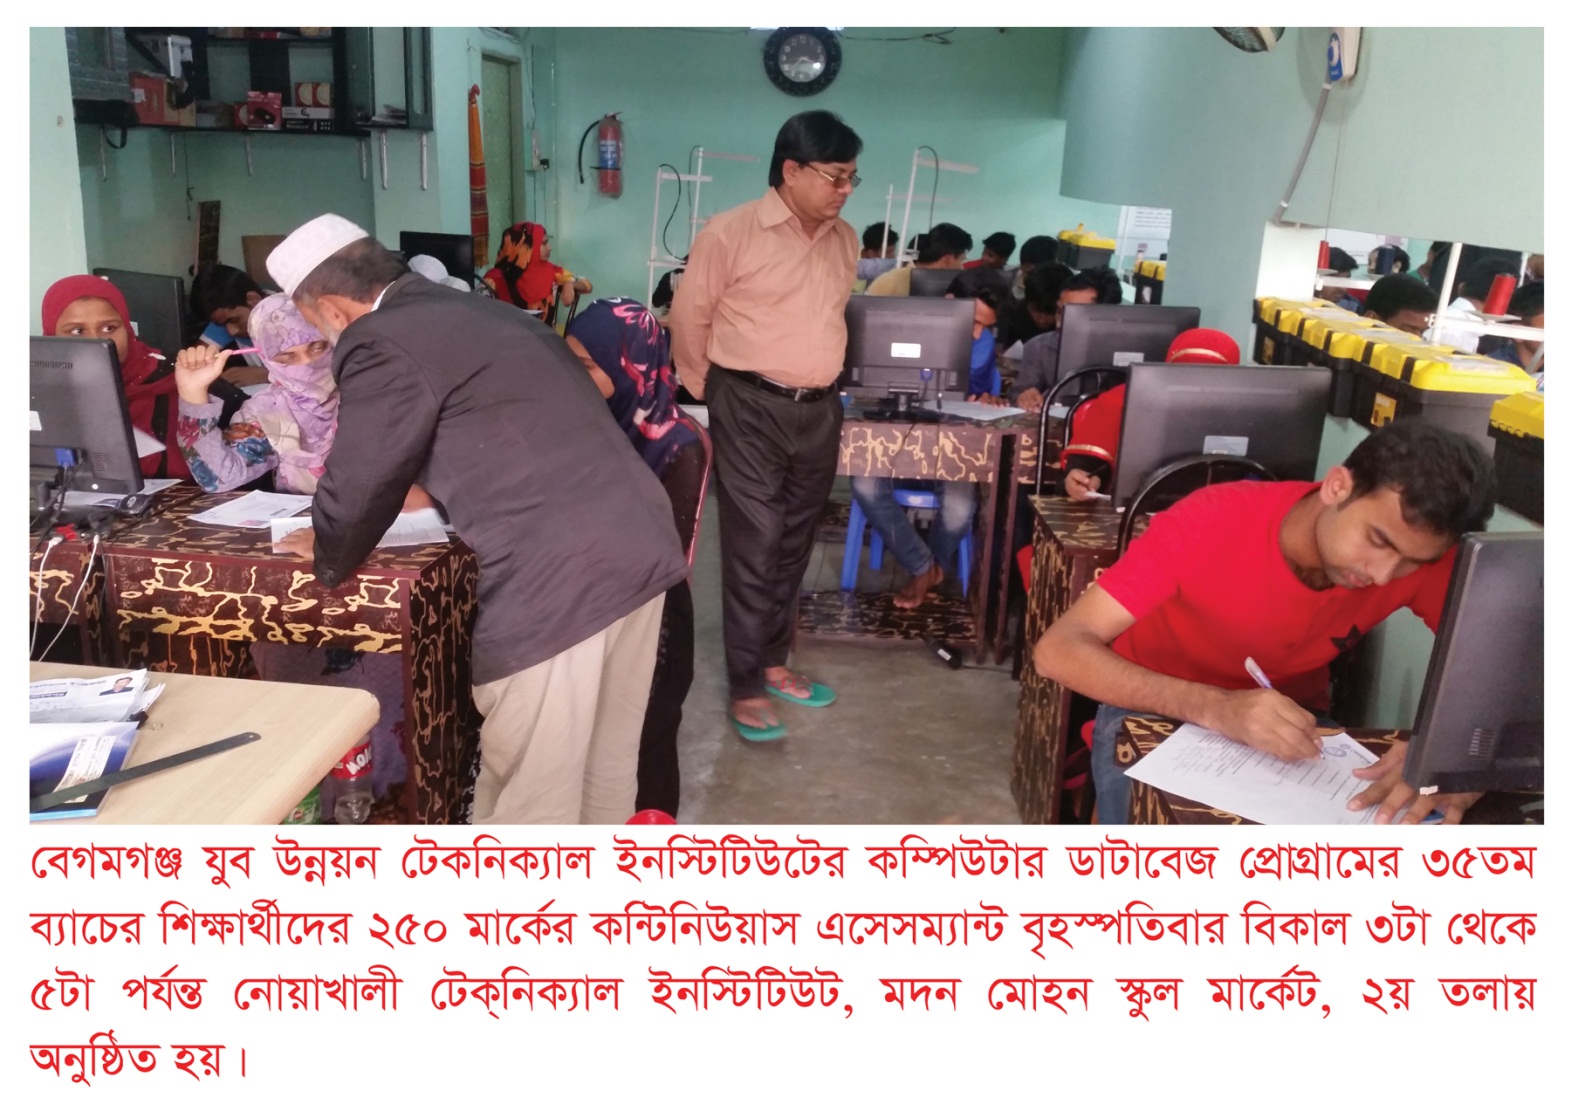 In the Picture- Chairman of Begamganj-Sonaimuri Shikkha O Sastha Unnayan Foundation and Begumganj Technical and Computer Institute Principal Gias Uddin Mithu visited the continuous assessment of Begumganj Technical & Computer Training Institute’s student. Senior Training Instructor Md. Abul Kashem was present.